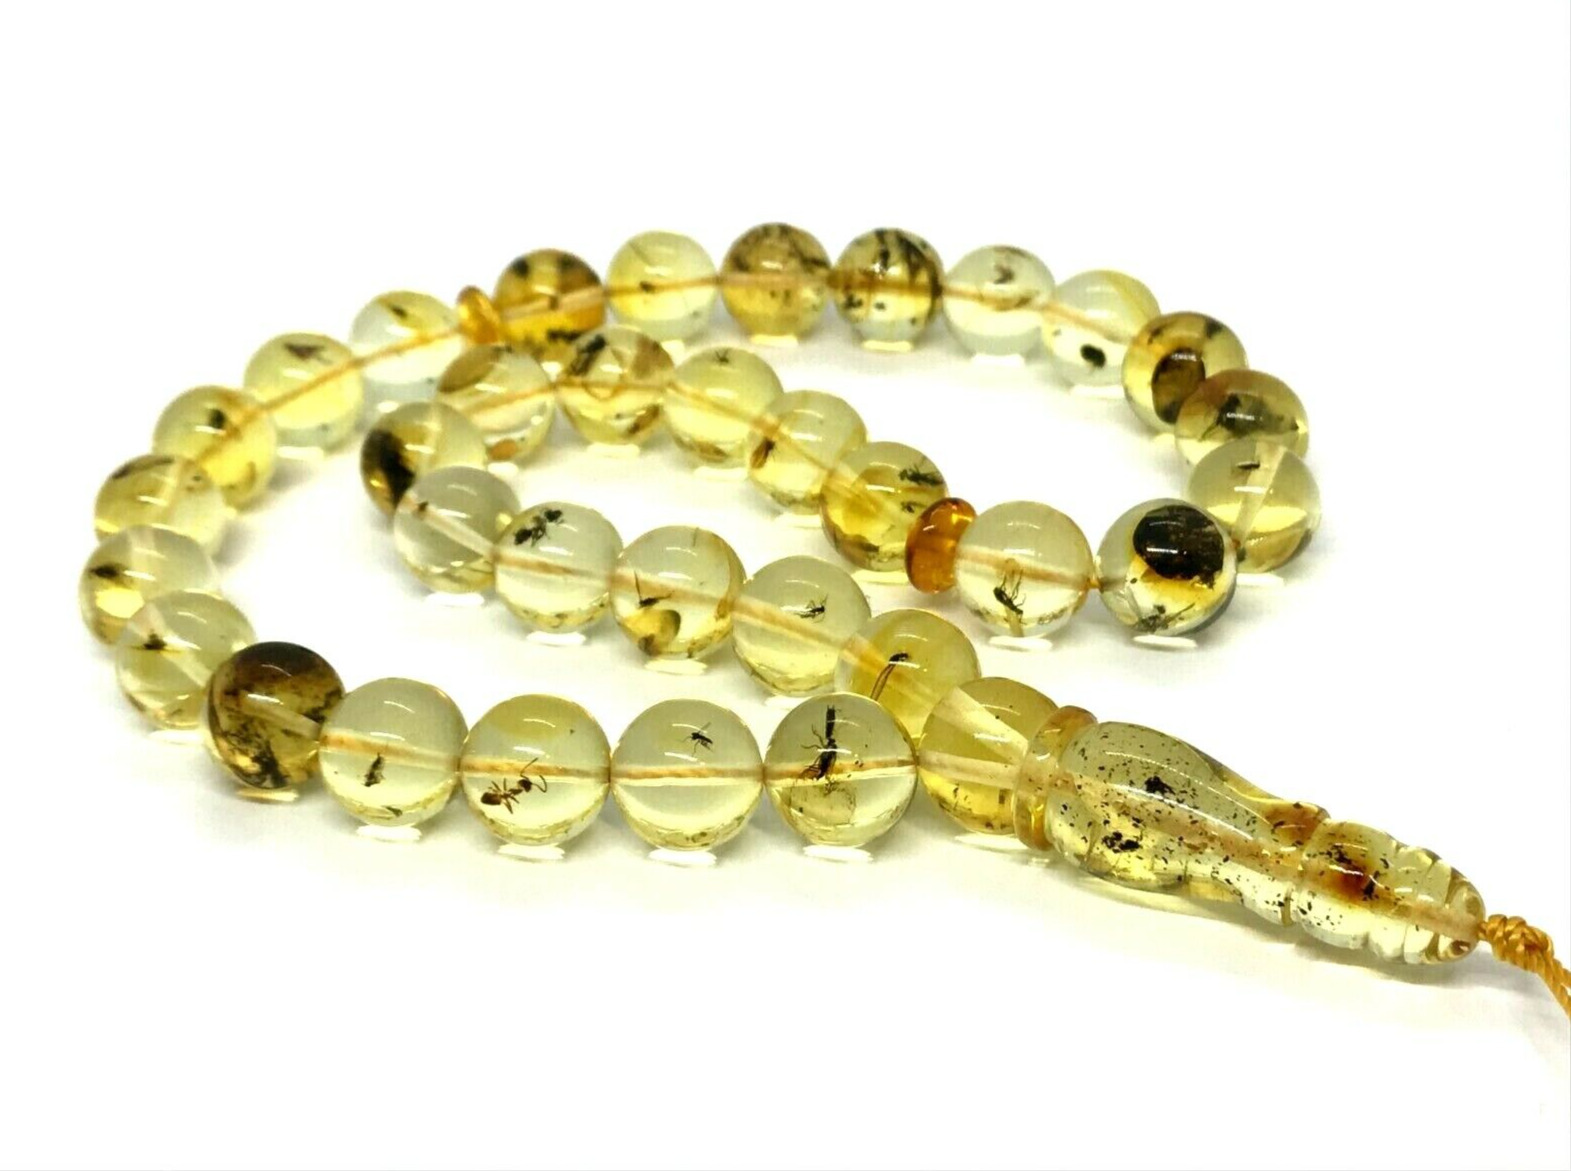 Islamic 33 Prayer Beads 10 mm INSECT EVERY BEAD Fossil Baltic Amber 20g 15190